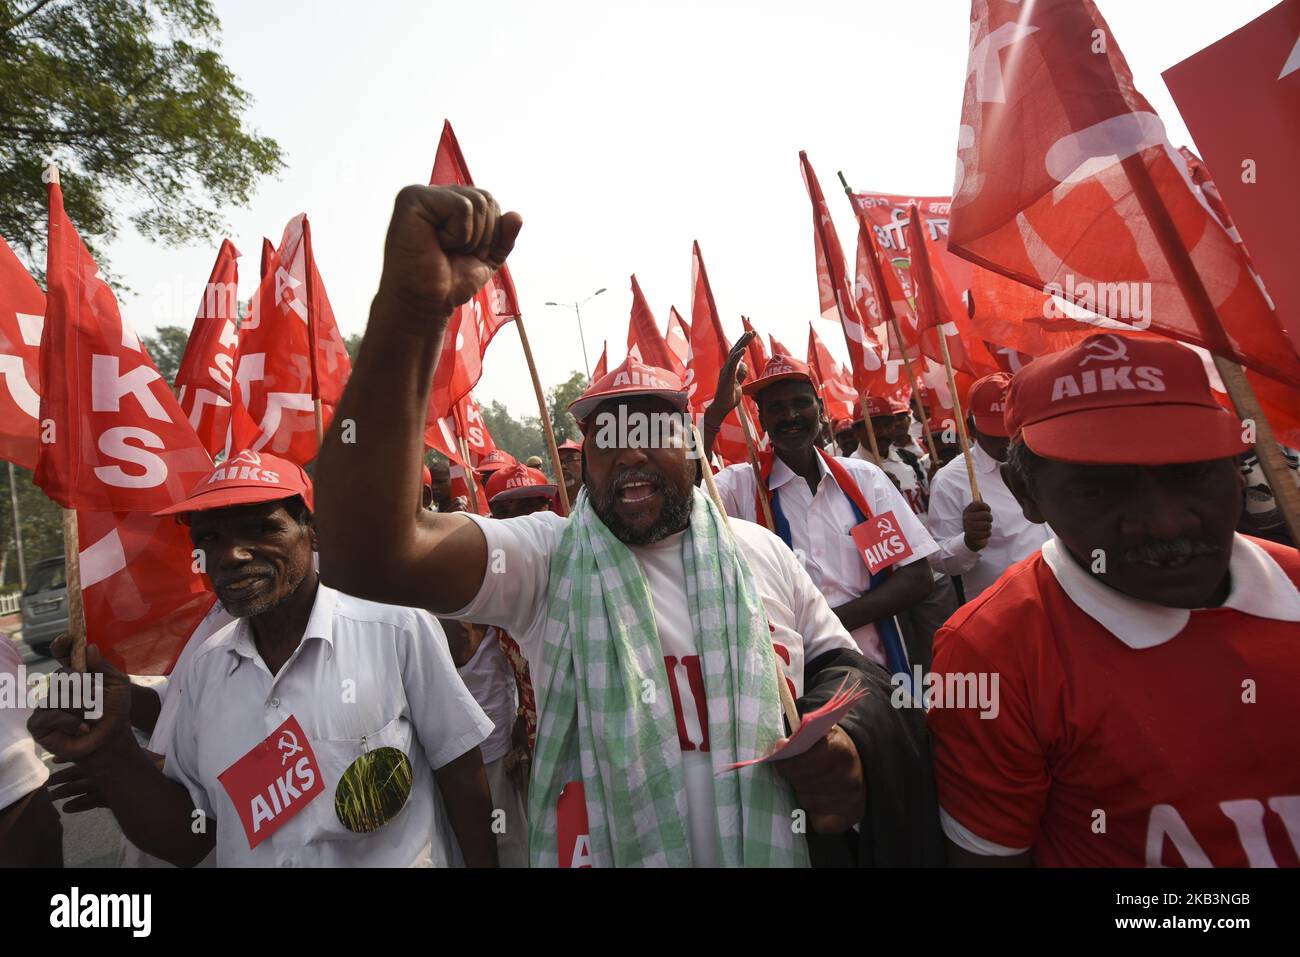 Indian farmers and agricultural workers take part in a march organized by the All India Kisan Sabha (AIKS) organization and Communist Party of India (Marxist) along with other leftist groups in New Delhi on November 29, 2018. Thousands of farmers from across India have massed in New Delhi demanding a special session of the Indian parliament to discuss ongoing agrarian crises, and demanding the minimum income for their produce. (Photo by Indraneel Chowdhury/NurPhoto) Stock Photo